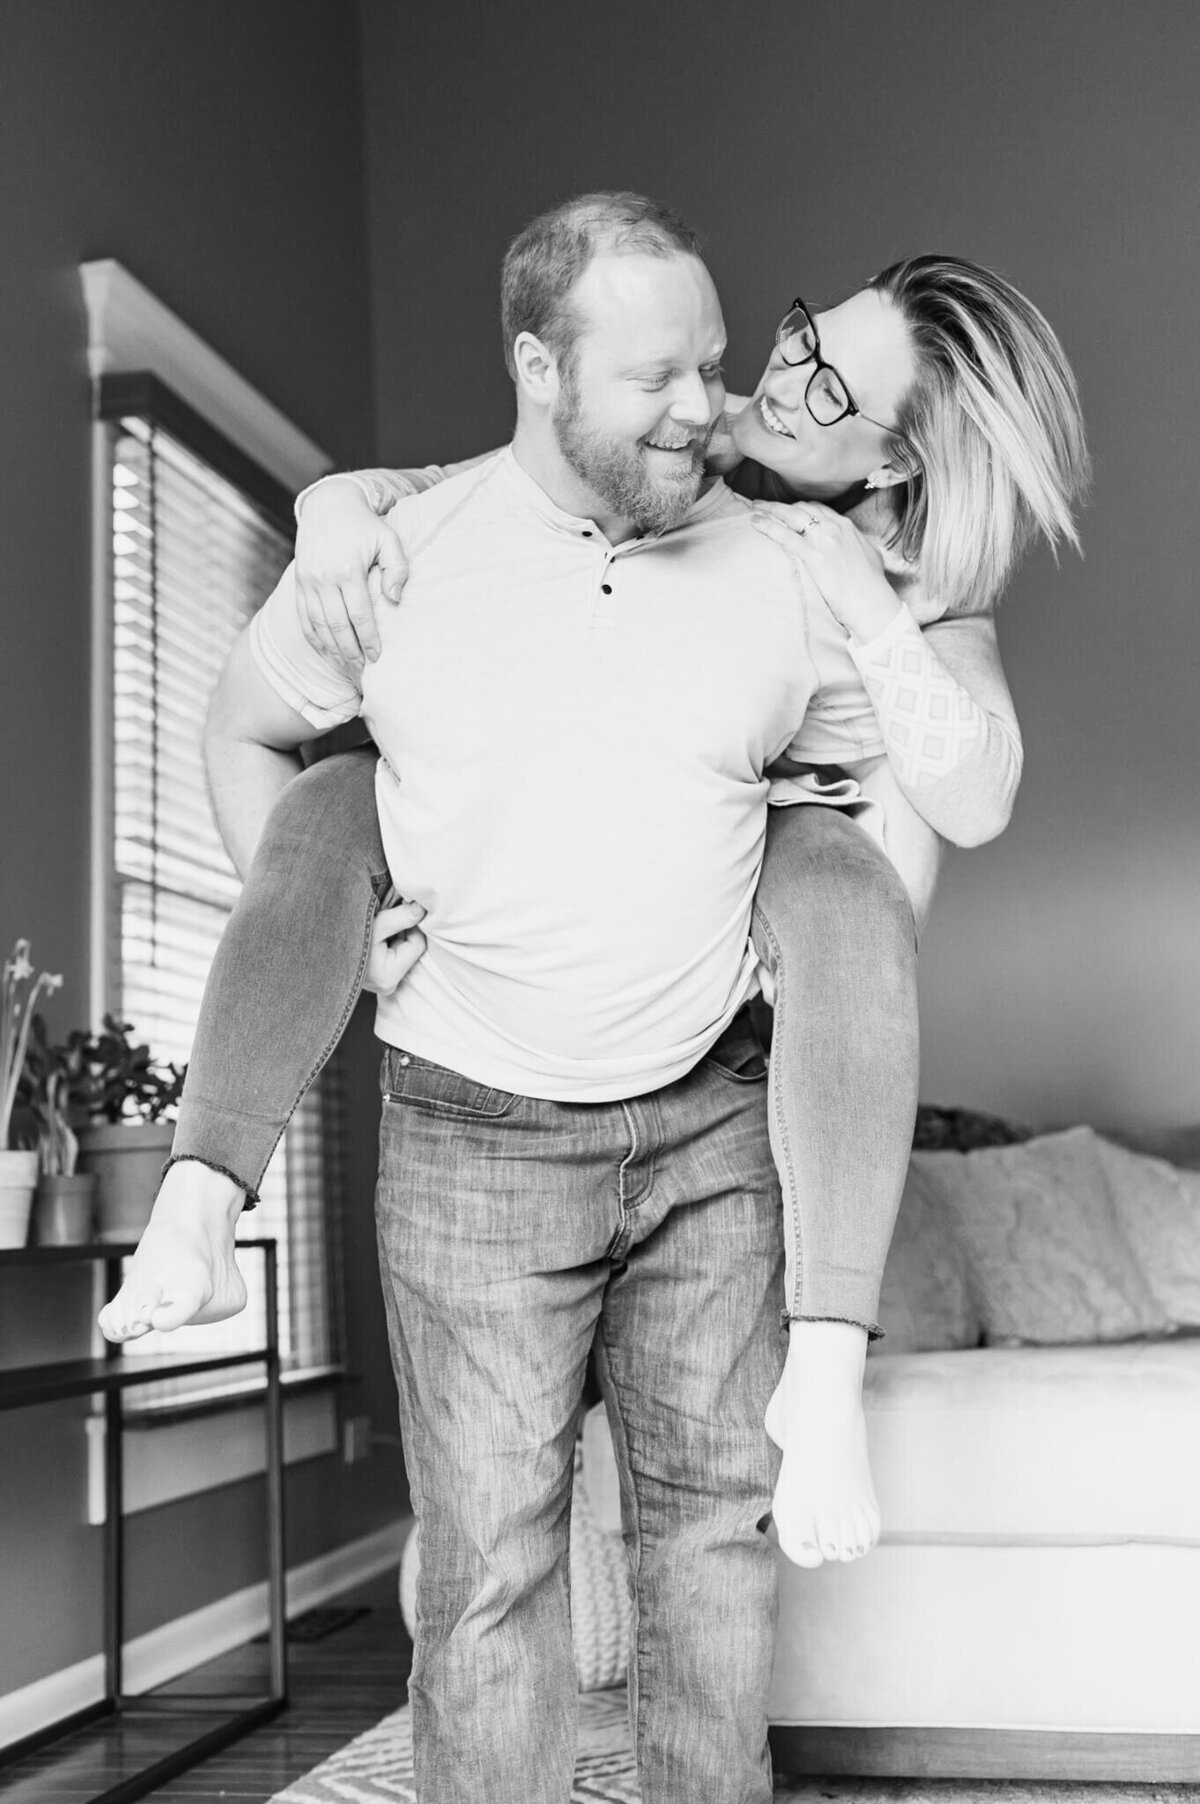 Man giving woman a playful piggy back ride during an in home couples photography session near Chicago, IL.